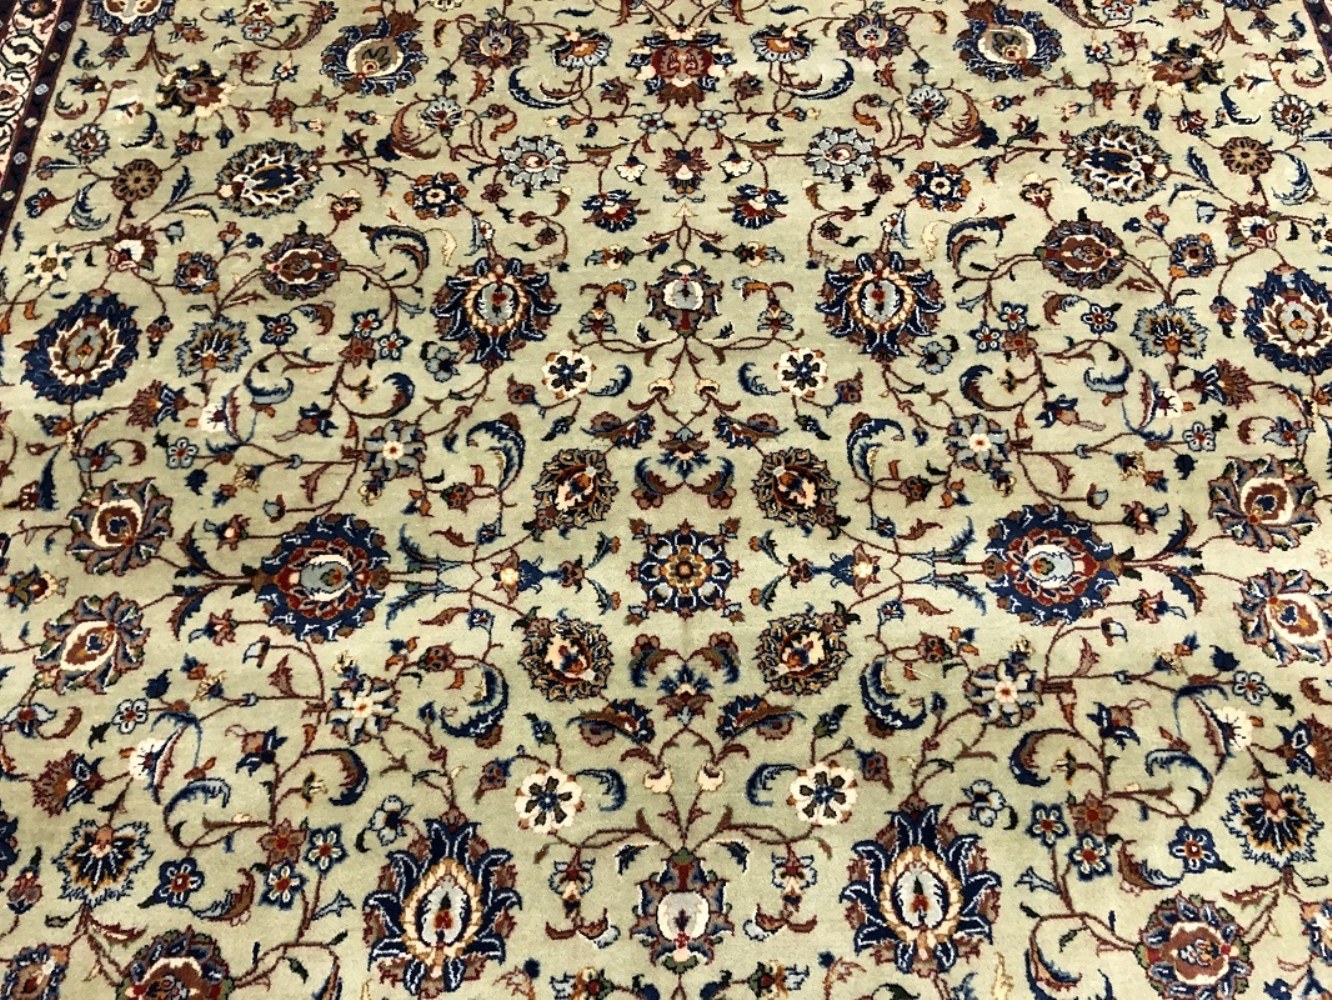 10x14 Aryana & Antique Revivals Hand Knotted Wool Area Rug - MR028357